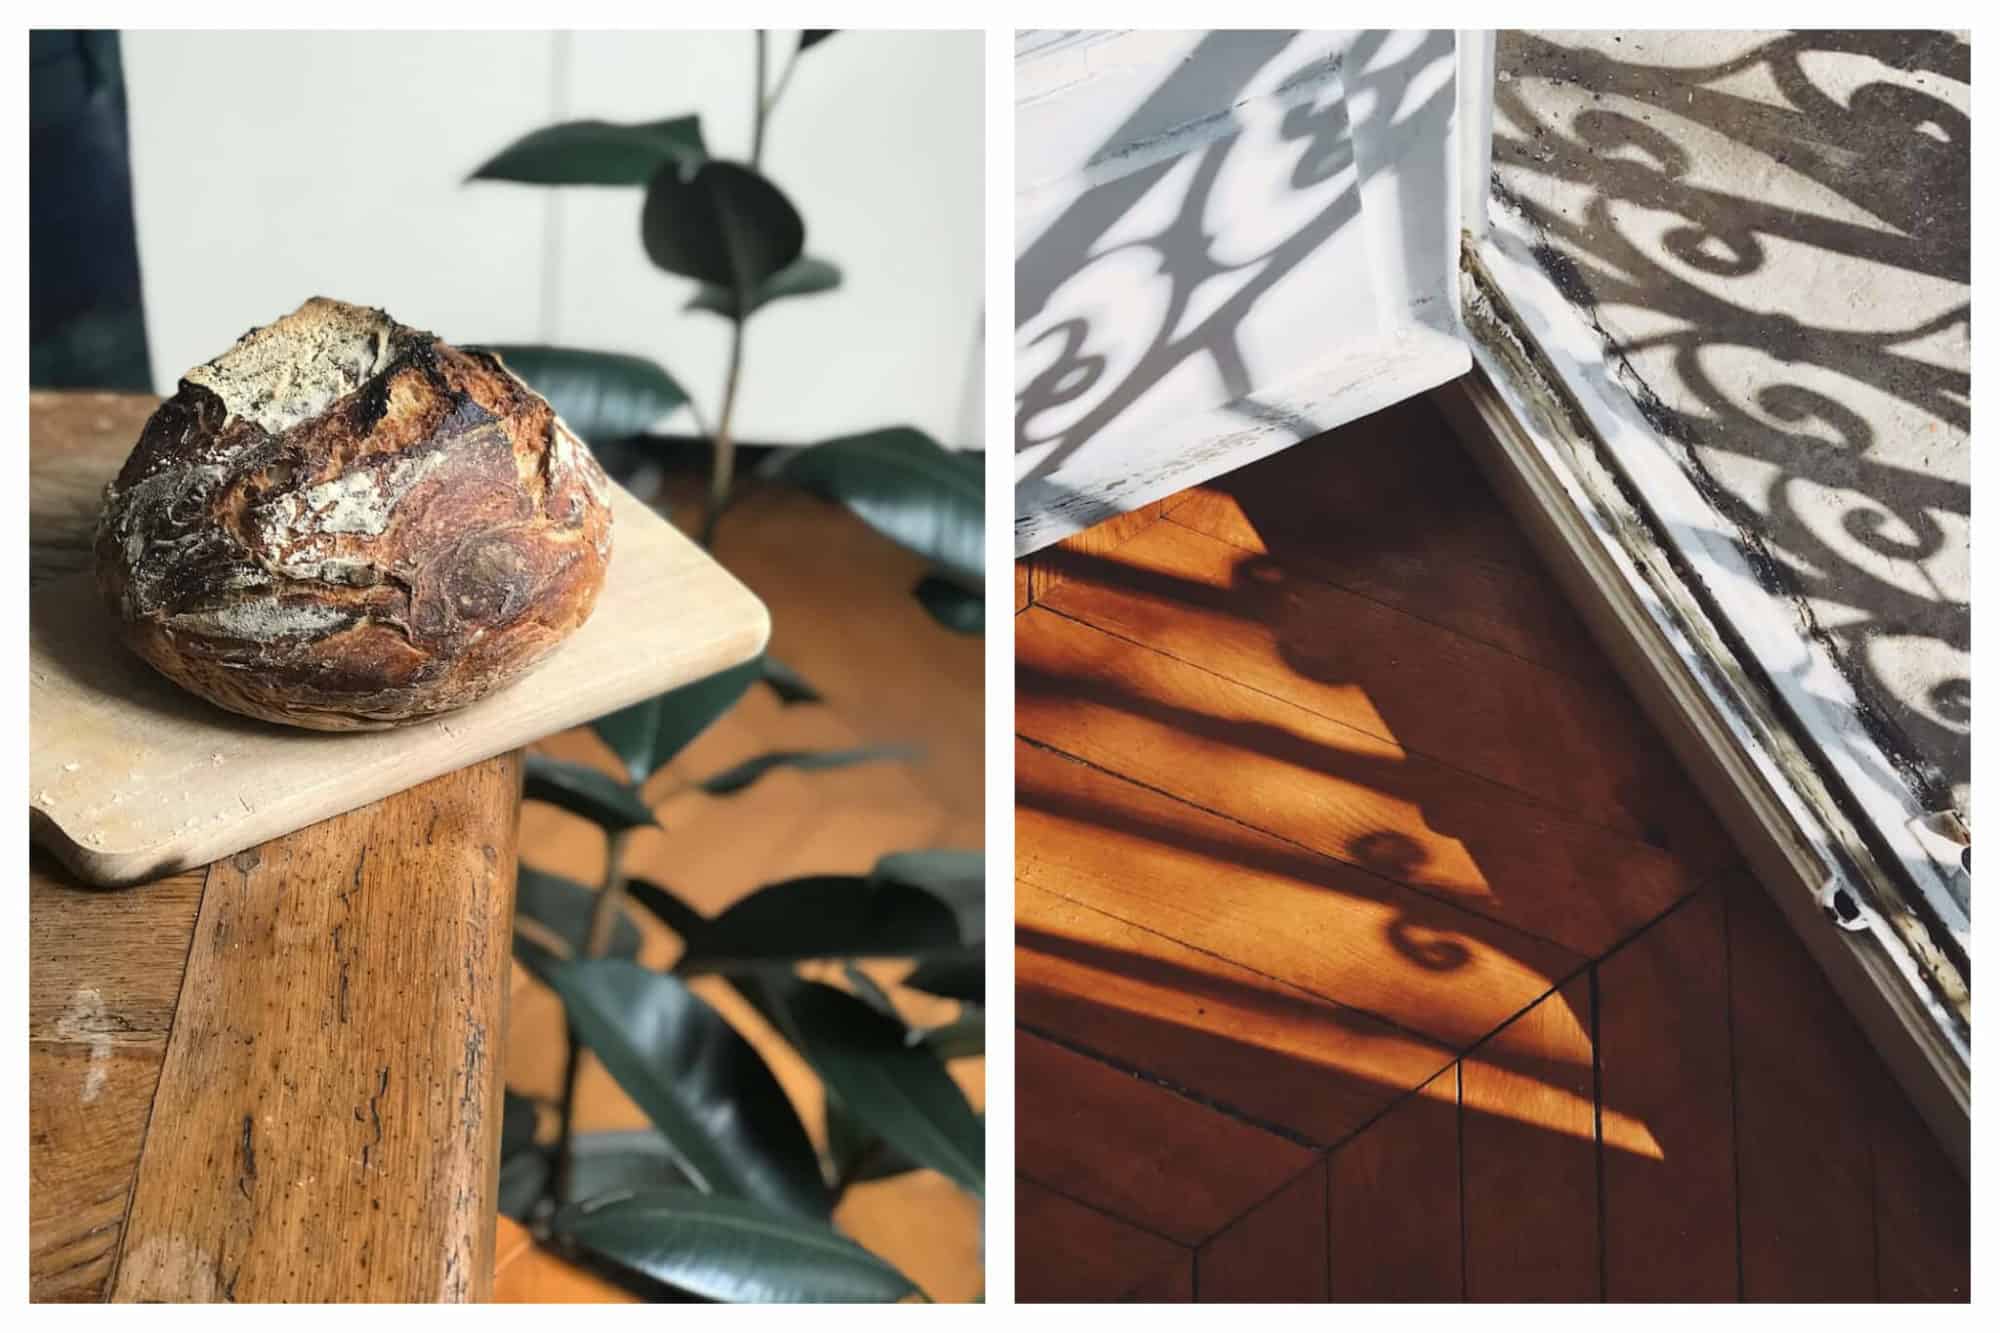 Left: A loaf of bread sits on a cutting board in an apartment in Paris.
Right: Rays of sunshine cast shadows in Erin's Paris apartment.